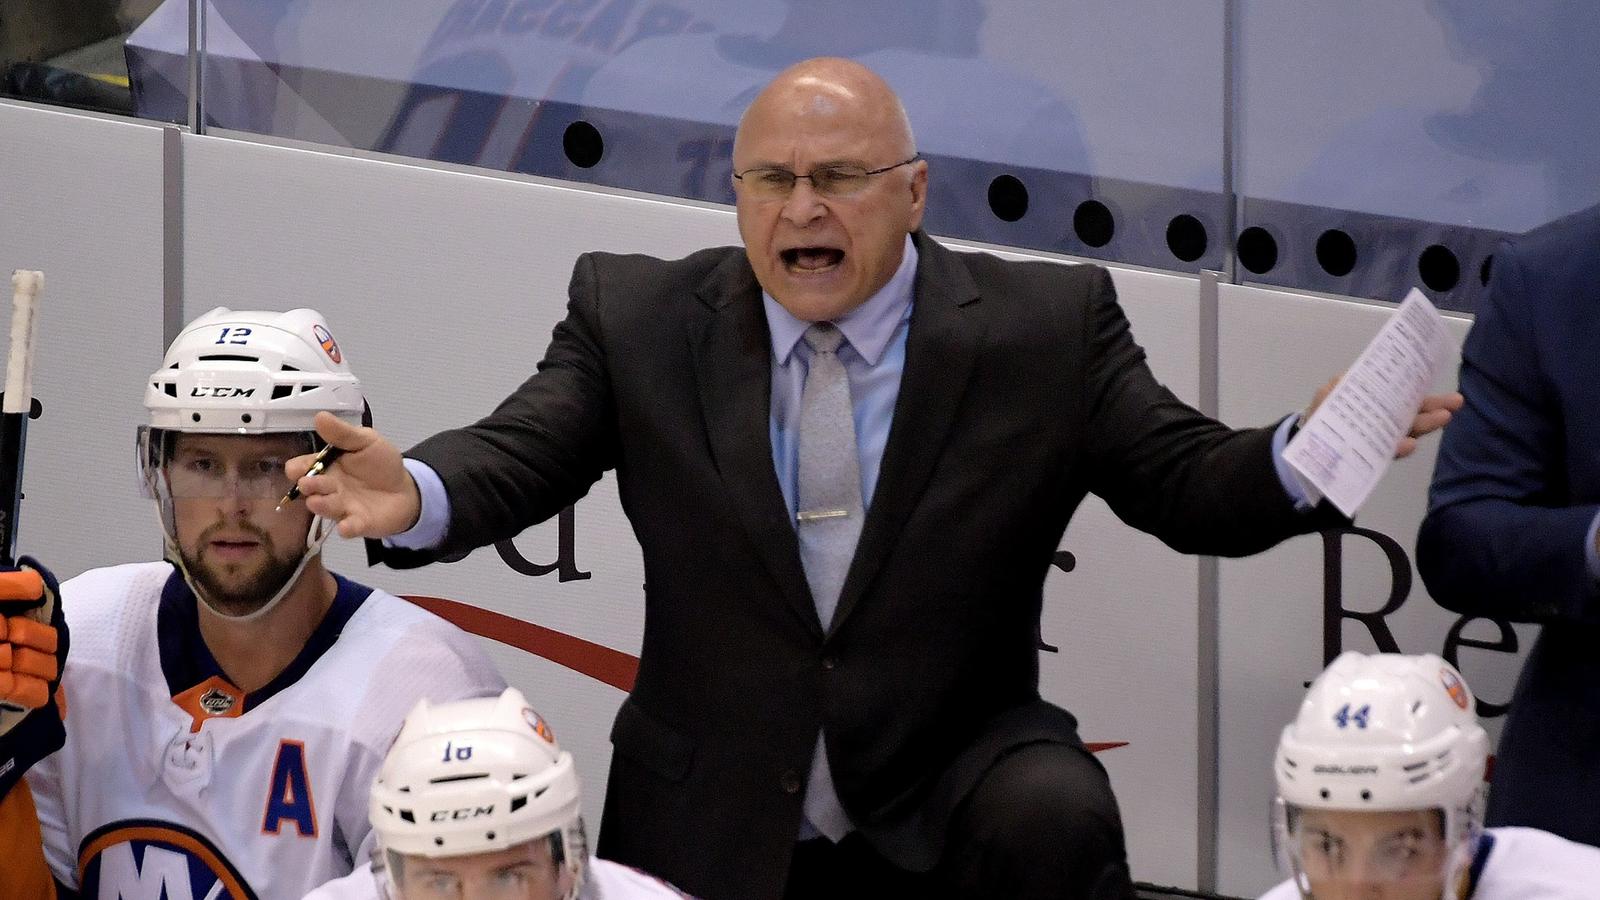 “Real reason” was Barry Trotz was fired by Islanders emerges